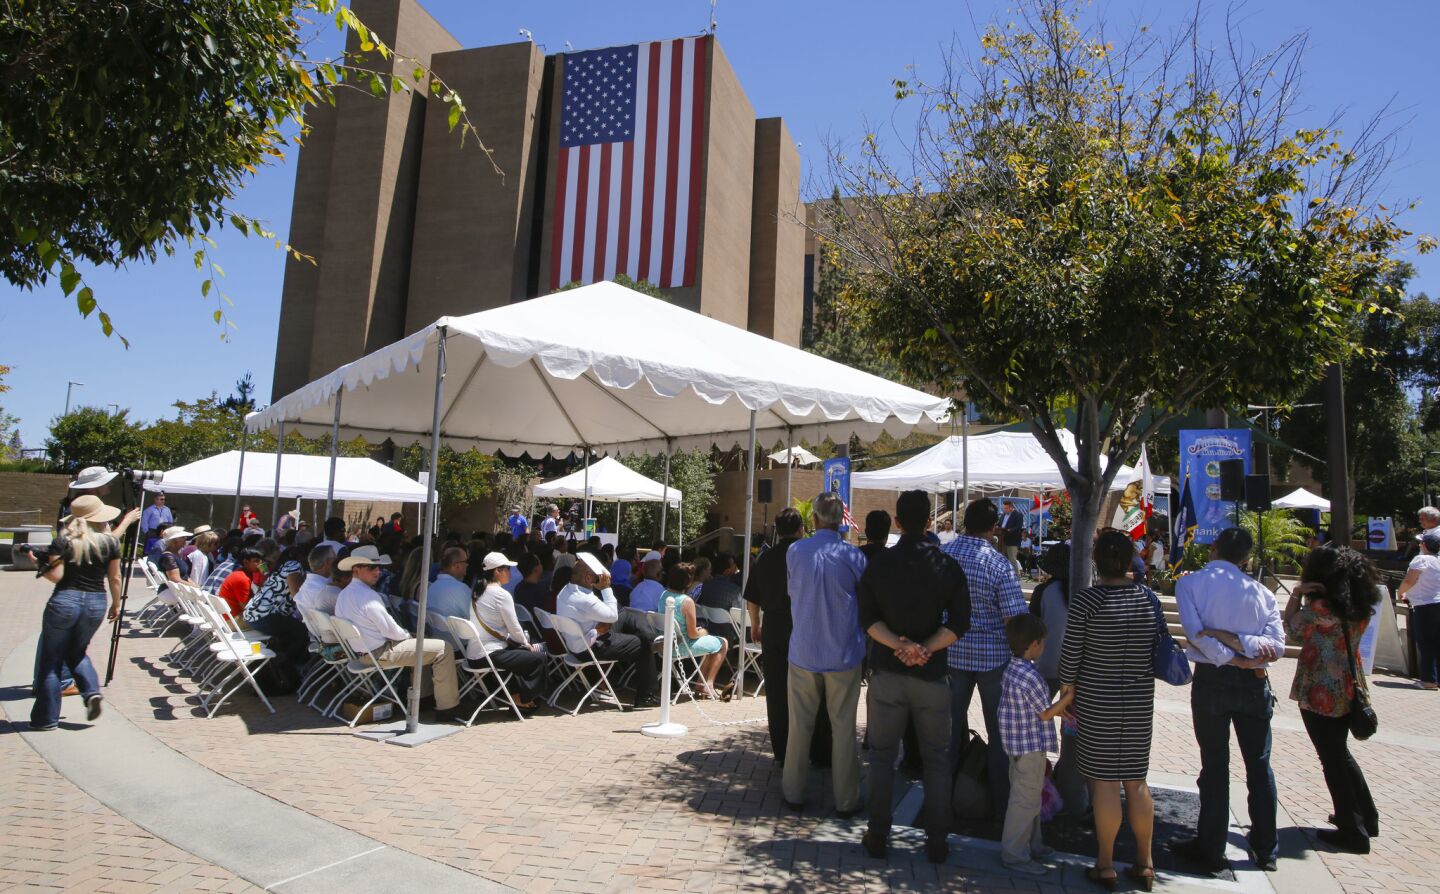 About 100 people from about 54 countries took the Oath of Allegiance to the United States of America and became U.S. citizens during a naturalization ceremony held in Centennial Plaza near El Cajon City Hall to kickoff El Cajon's, America on Main Street festivities.